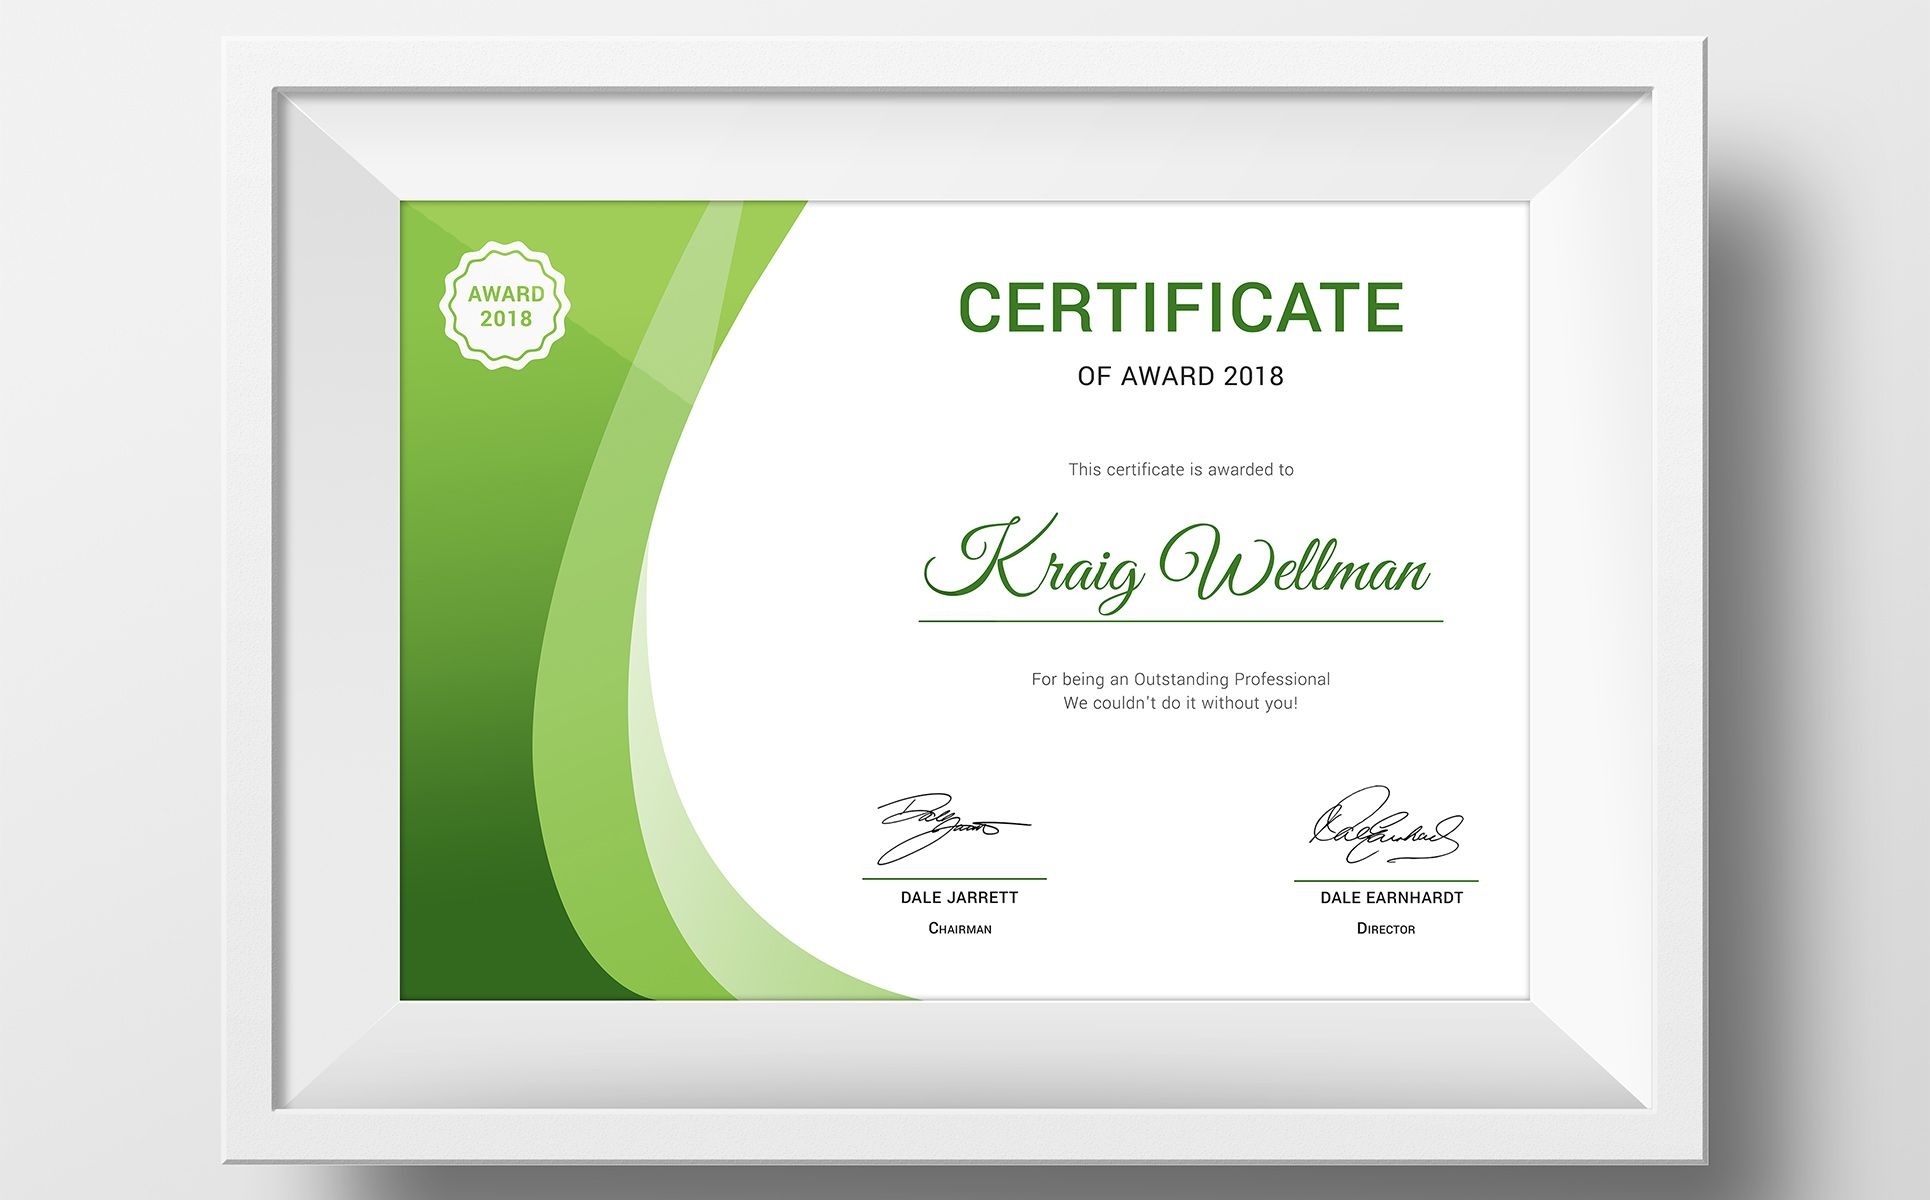 Award Certificate Template #73891 | Design Illustration Art Within Small Certificate Template